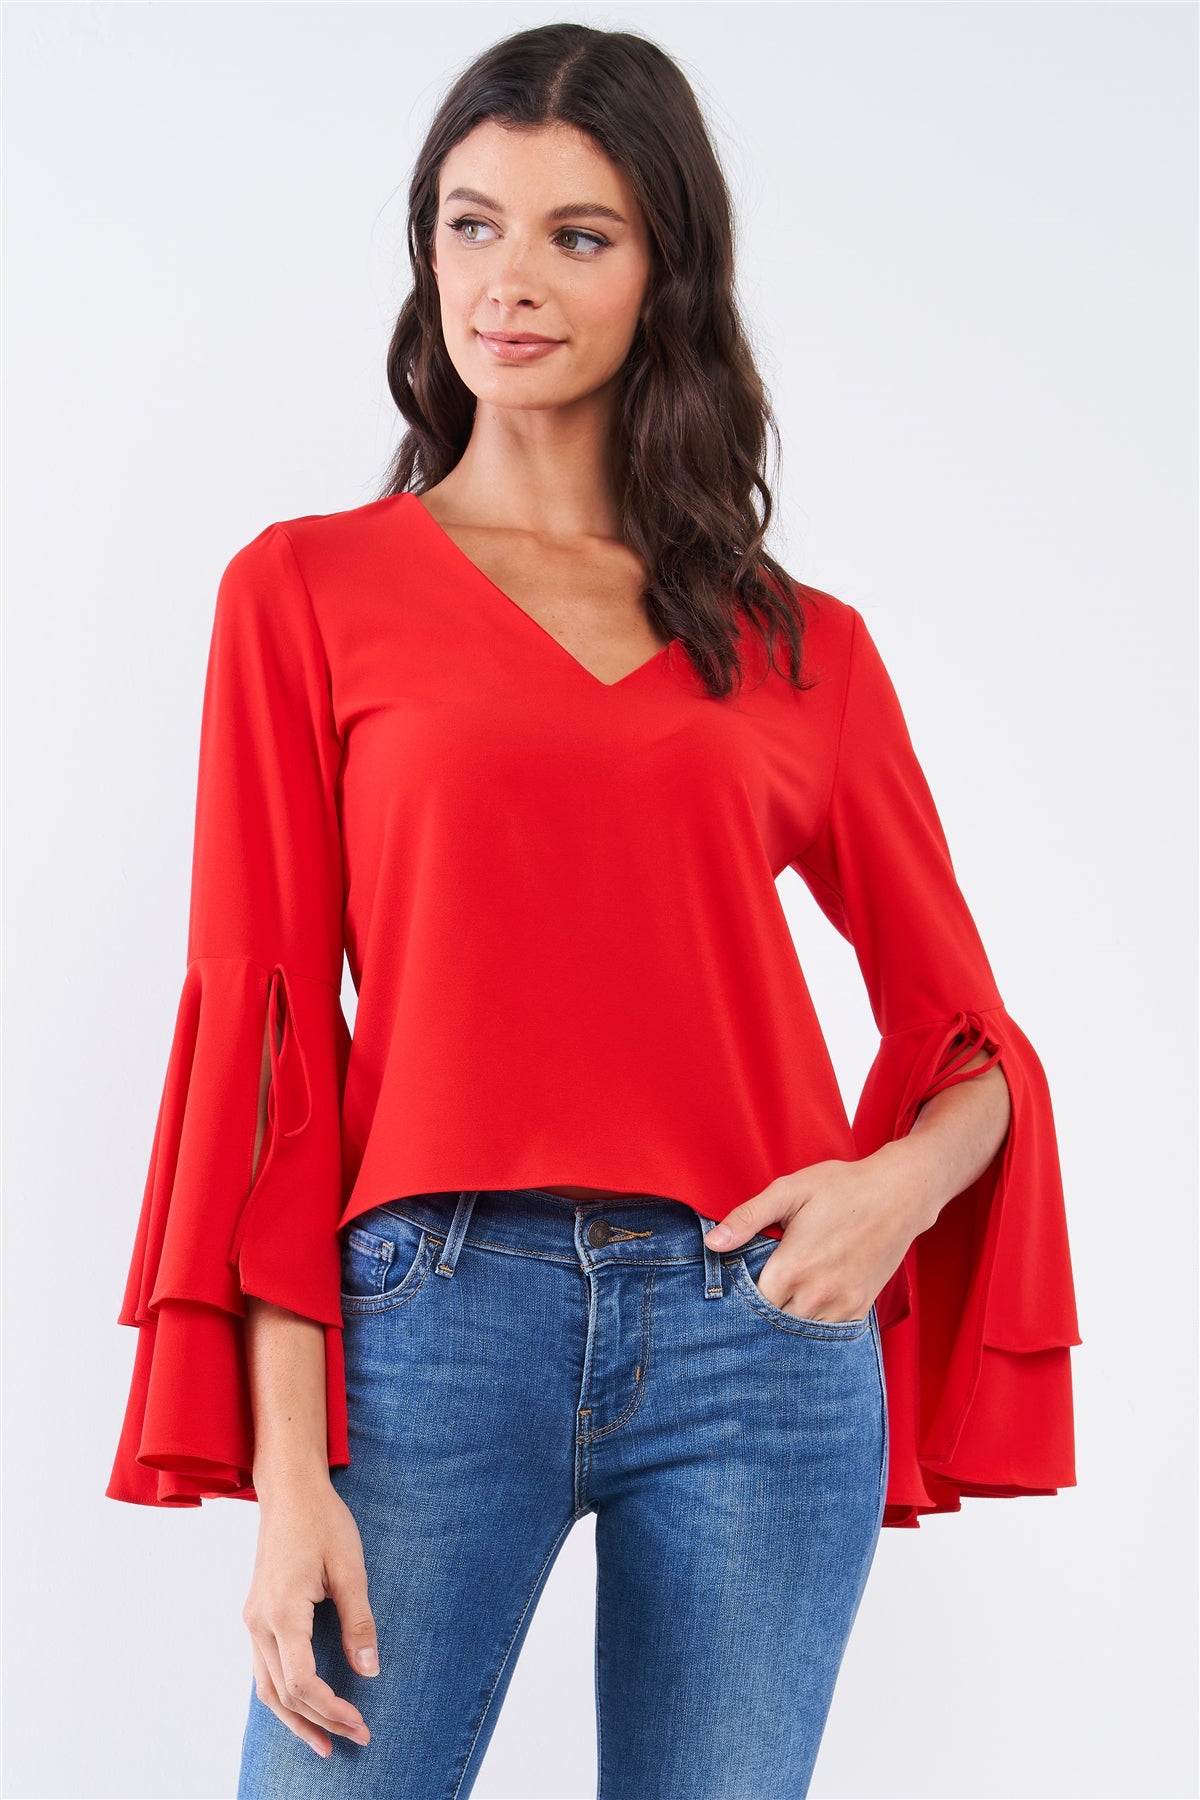 Bluebell Frill Top